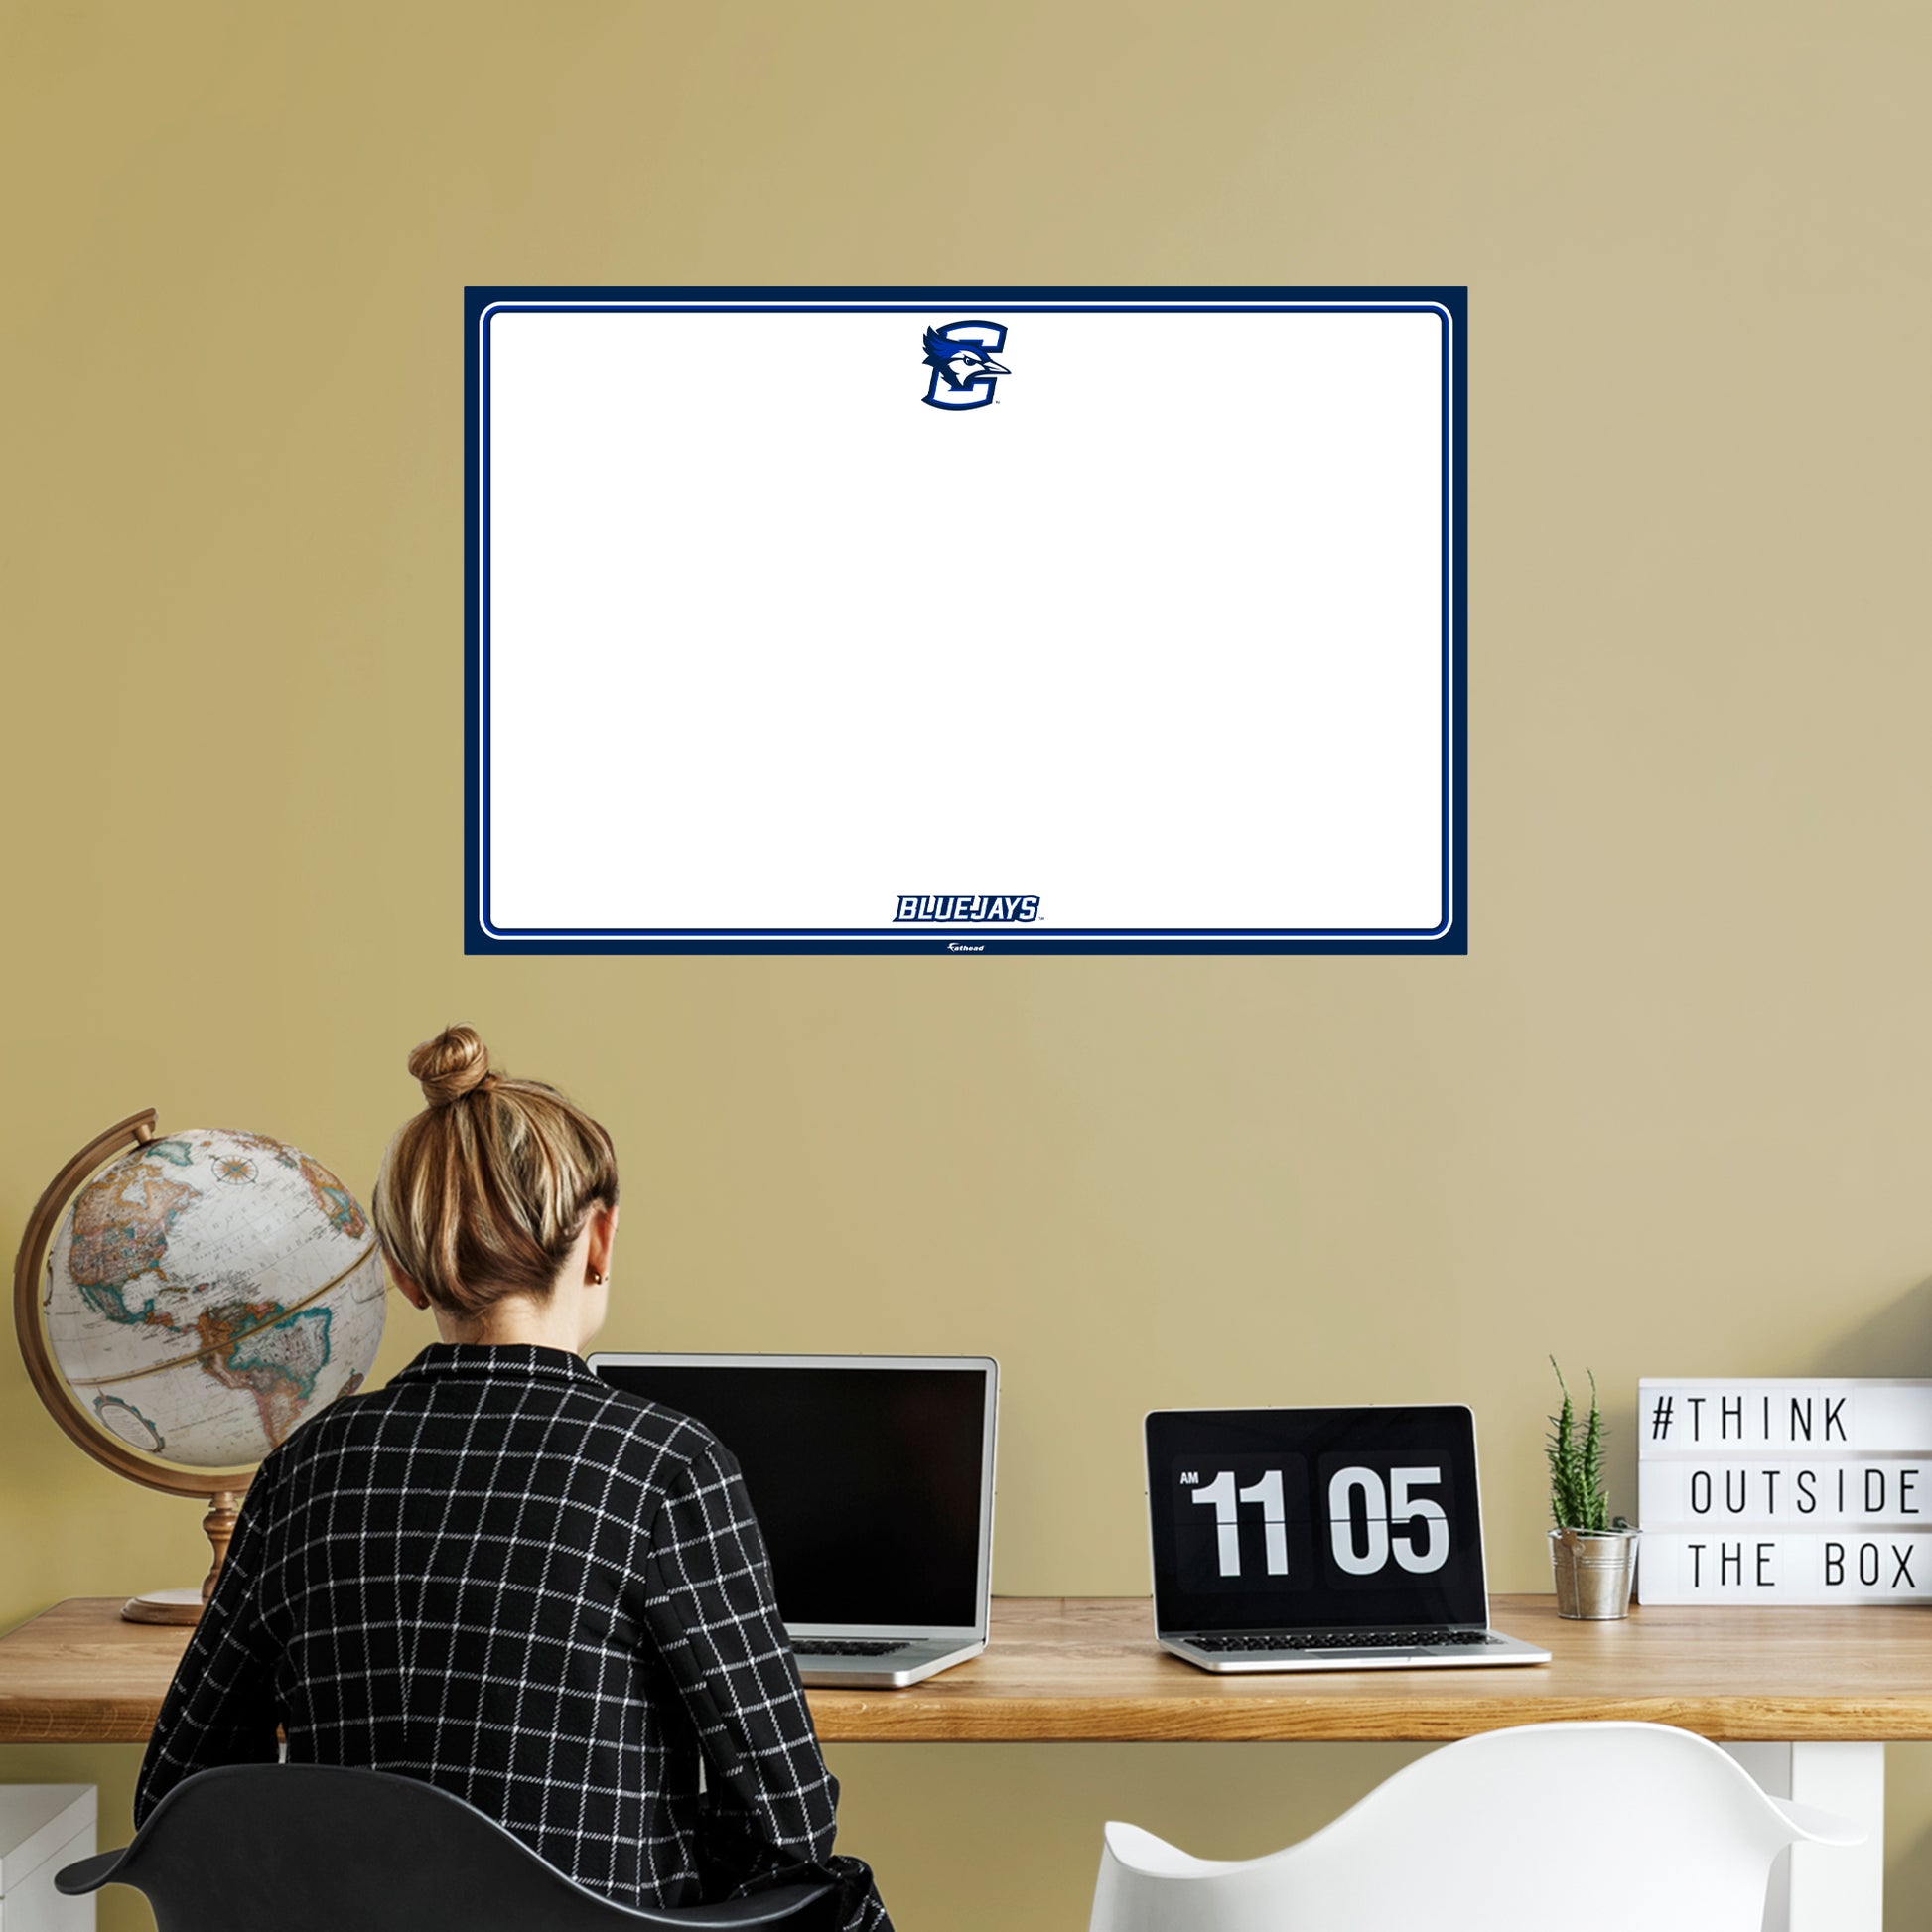 Fathead Dry Erase Whiteboard - Huge Removable Wall Decal